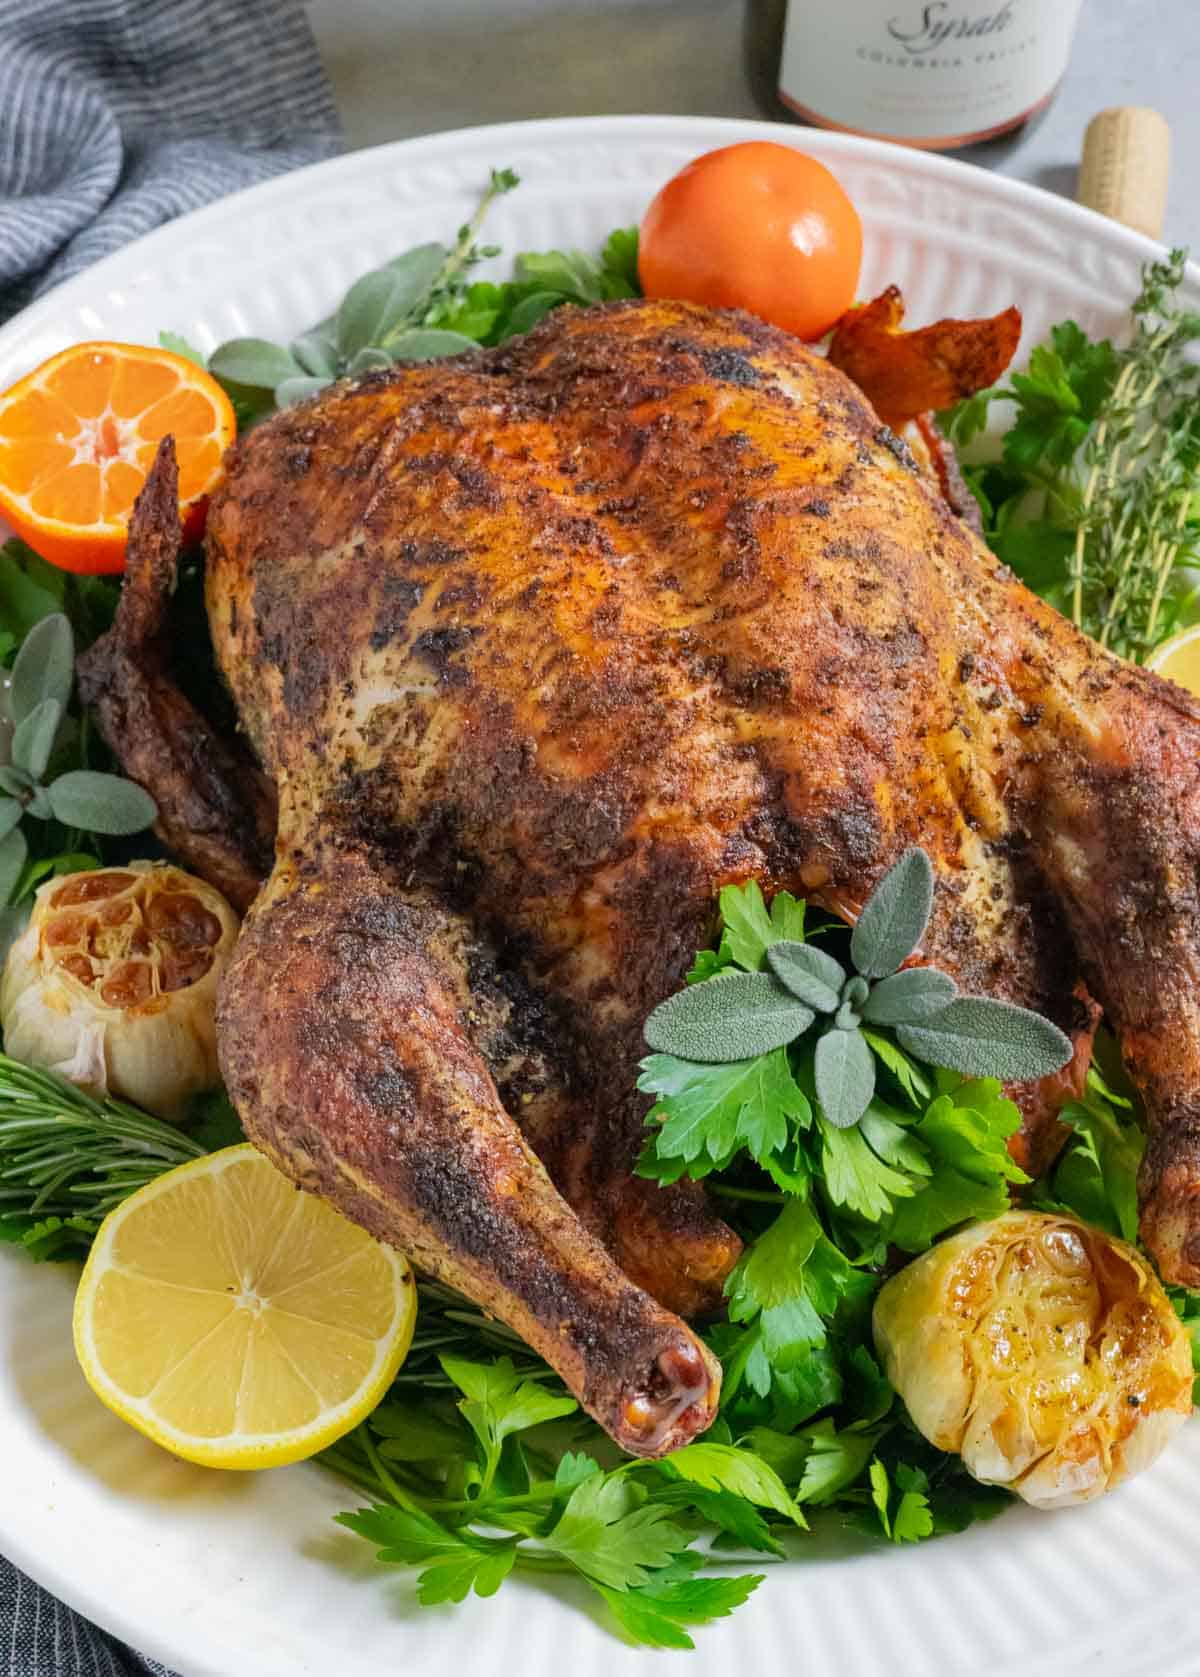 Crispy skninned roasted whole chicken on a platter with roasted garlic, citrus and herbs.